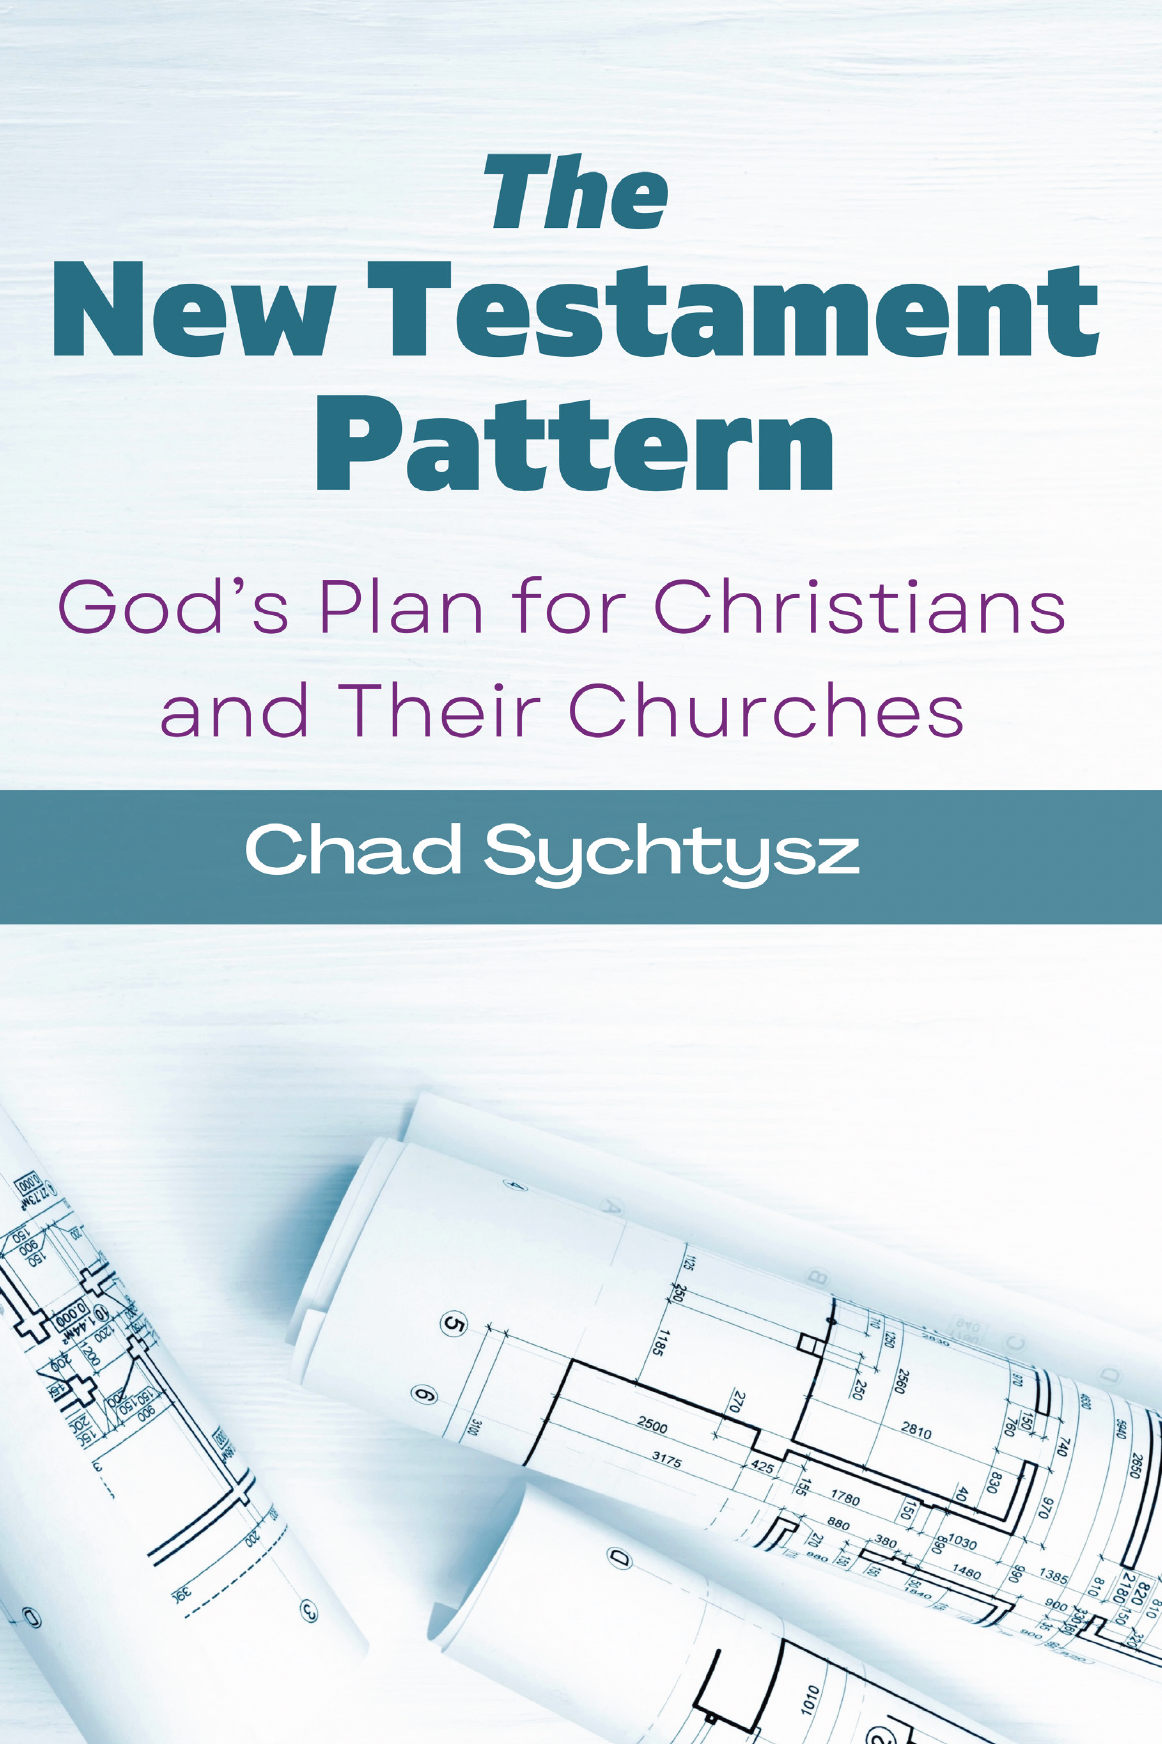 We're Excited About Chad Sychtysz's New Book